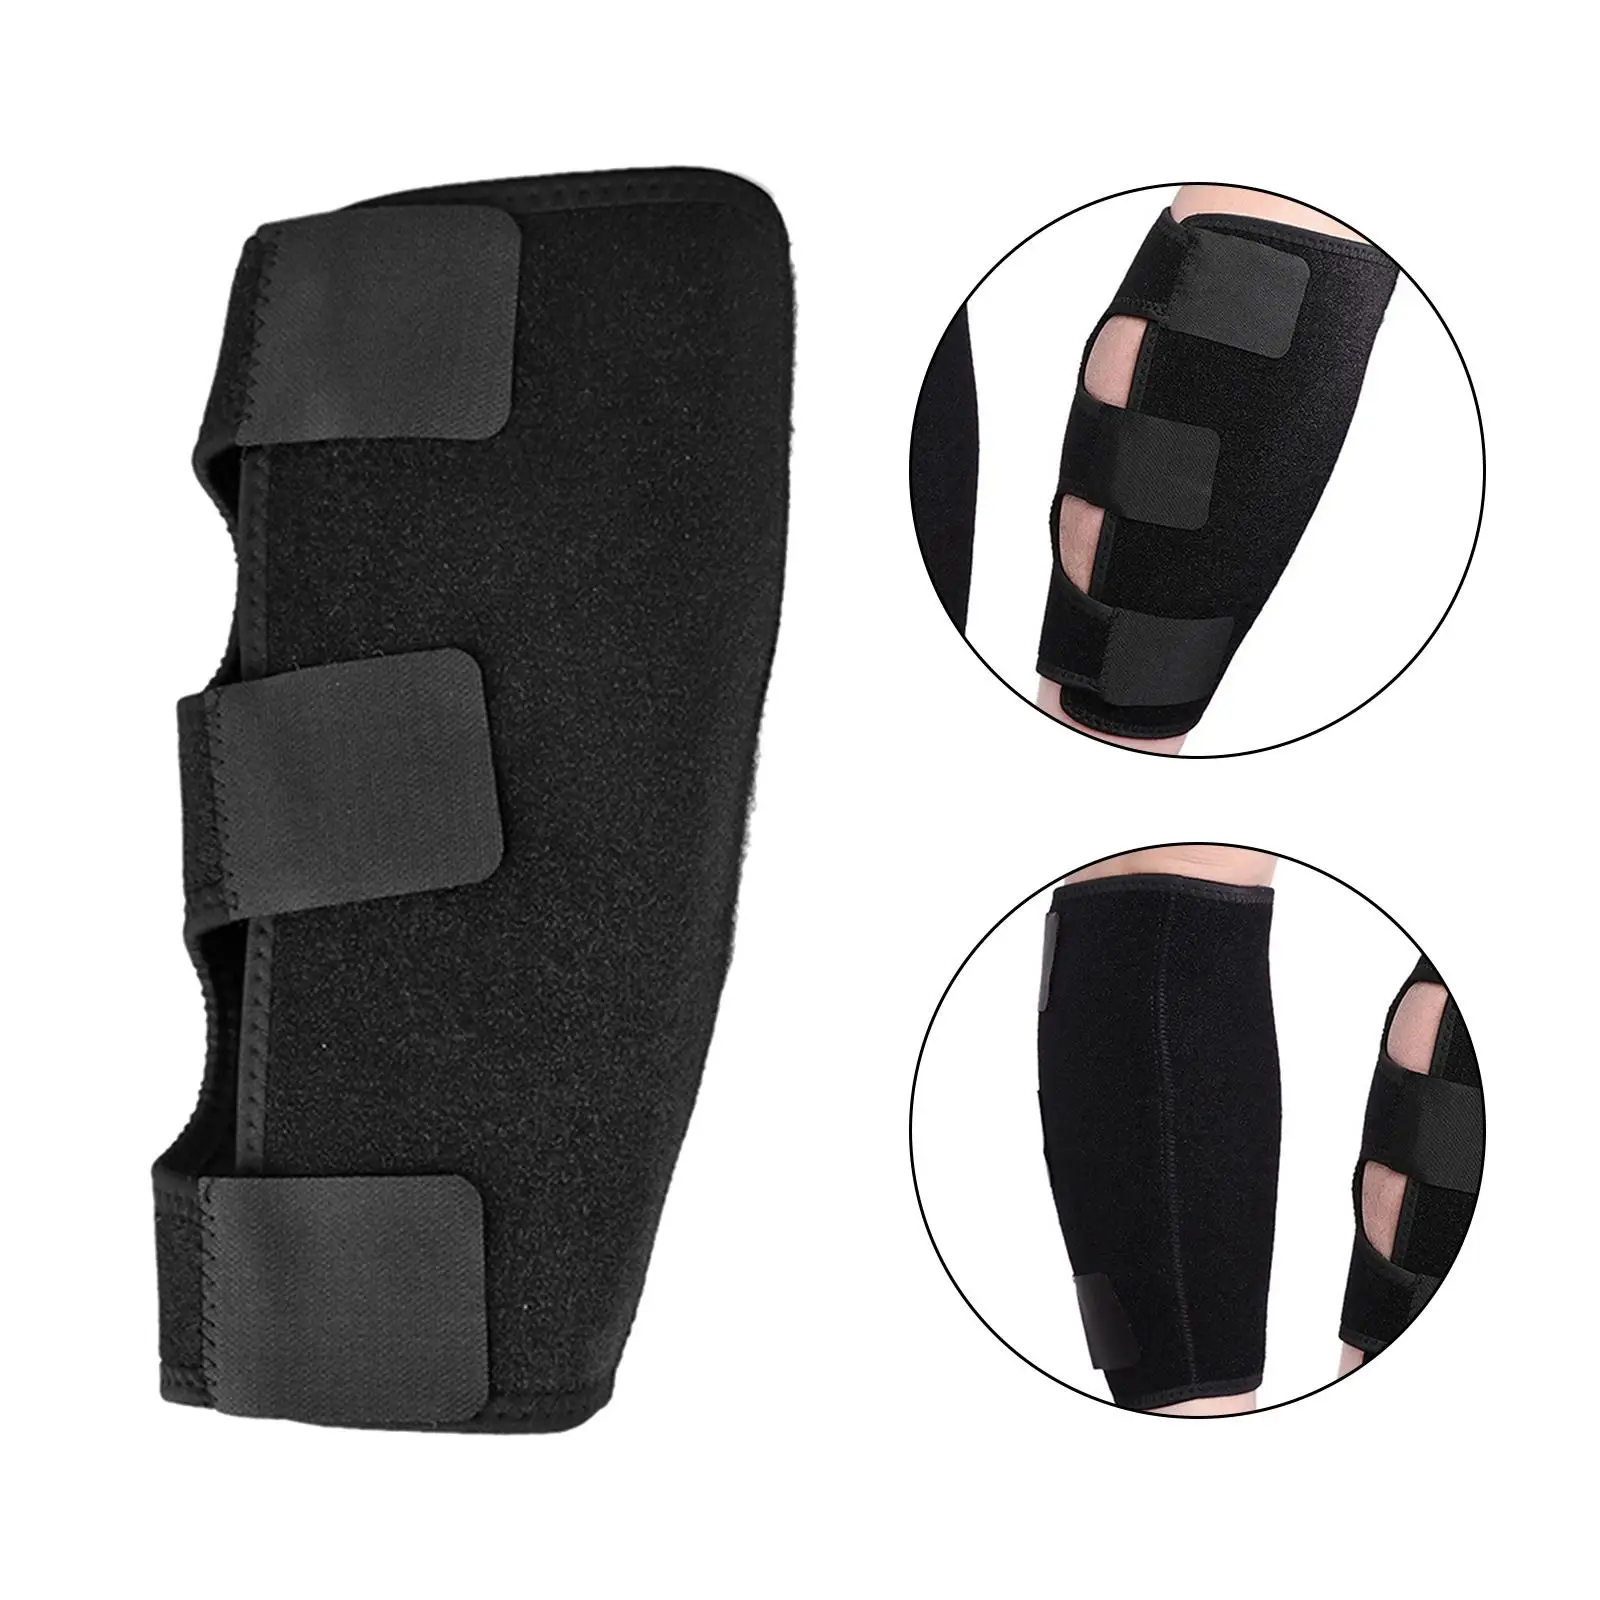 Calf Support Brace Accessory Compression Wrap Sleeve Leg Sleeves for Men Women Running outdoor